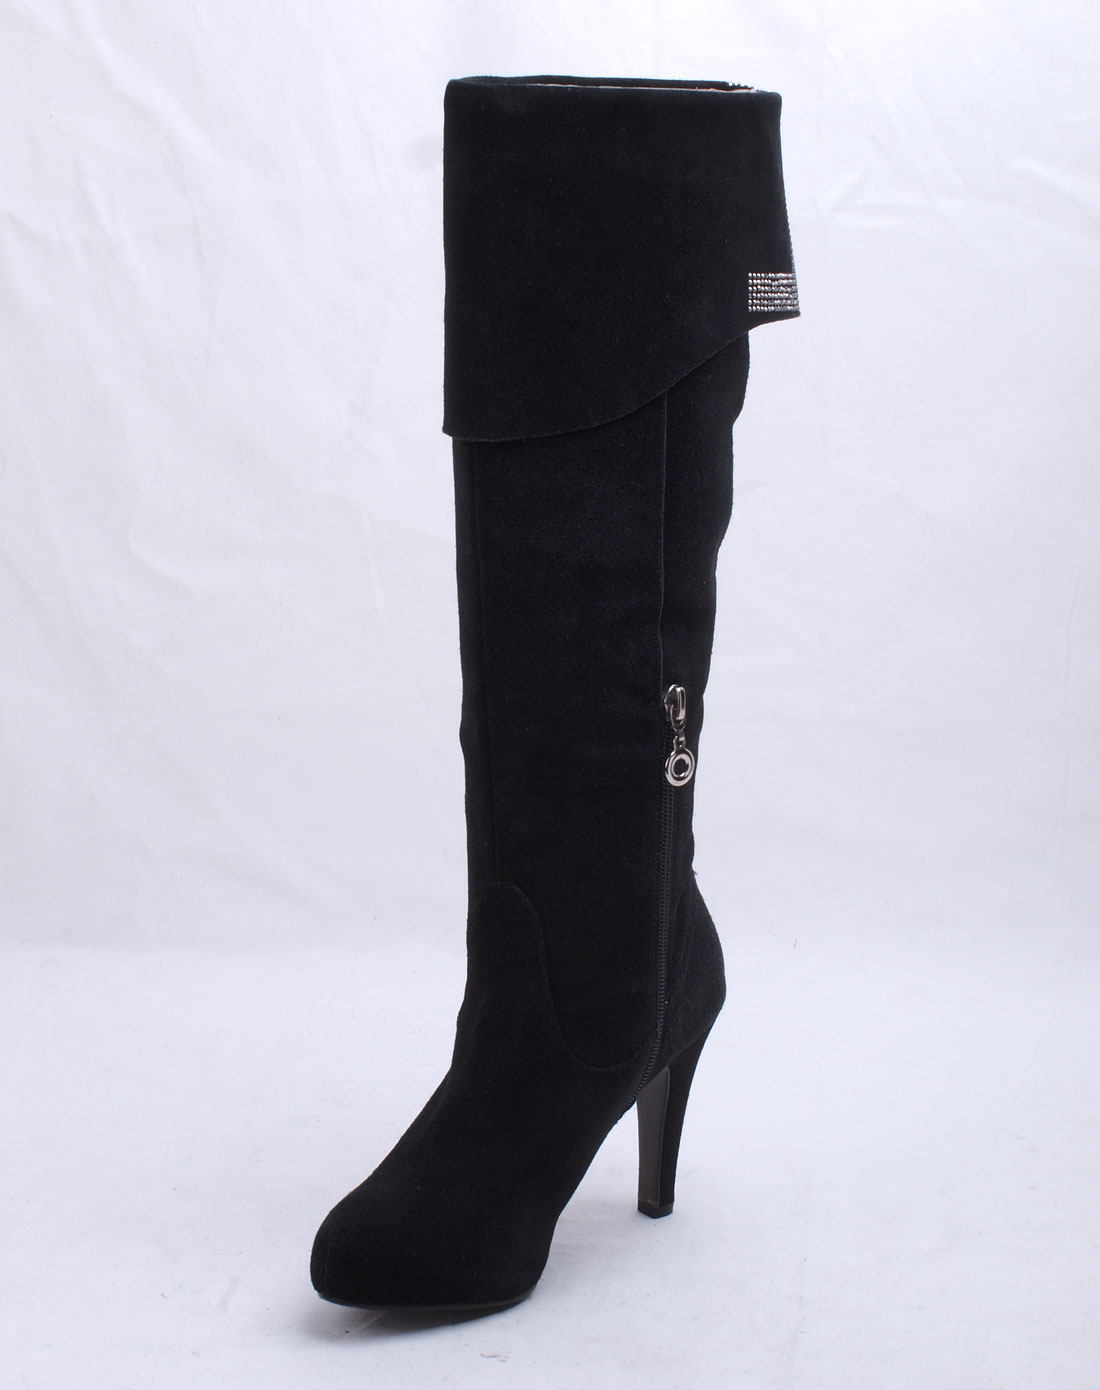 Stockings long boots_Stockings long boots_Stockings long boots